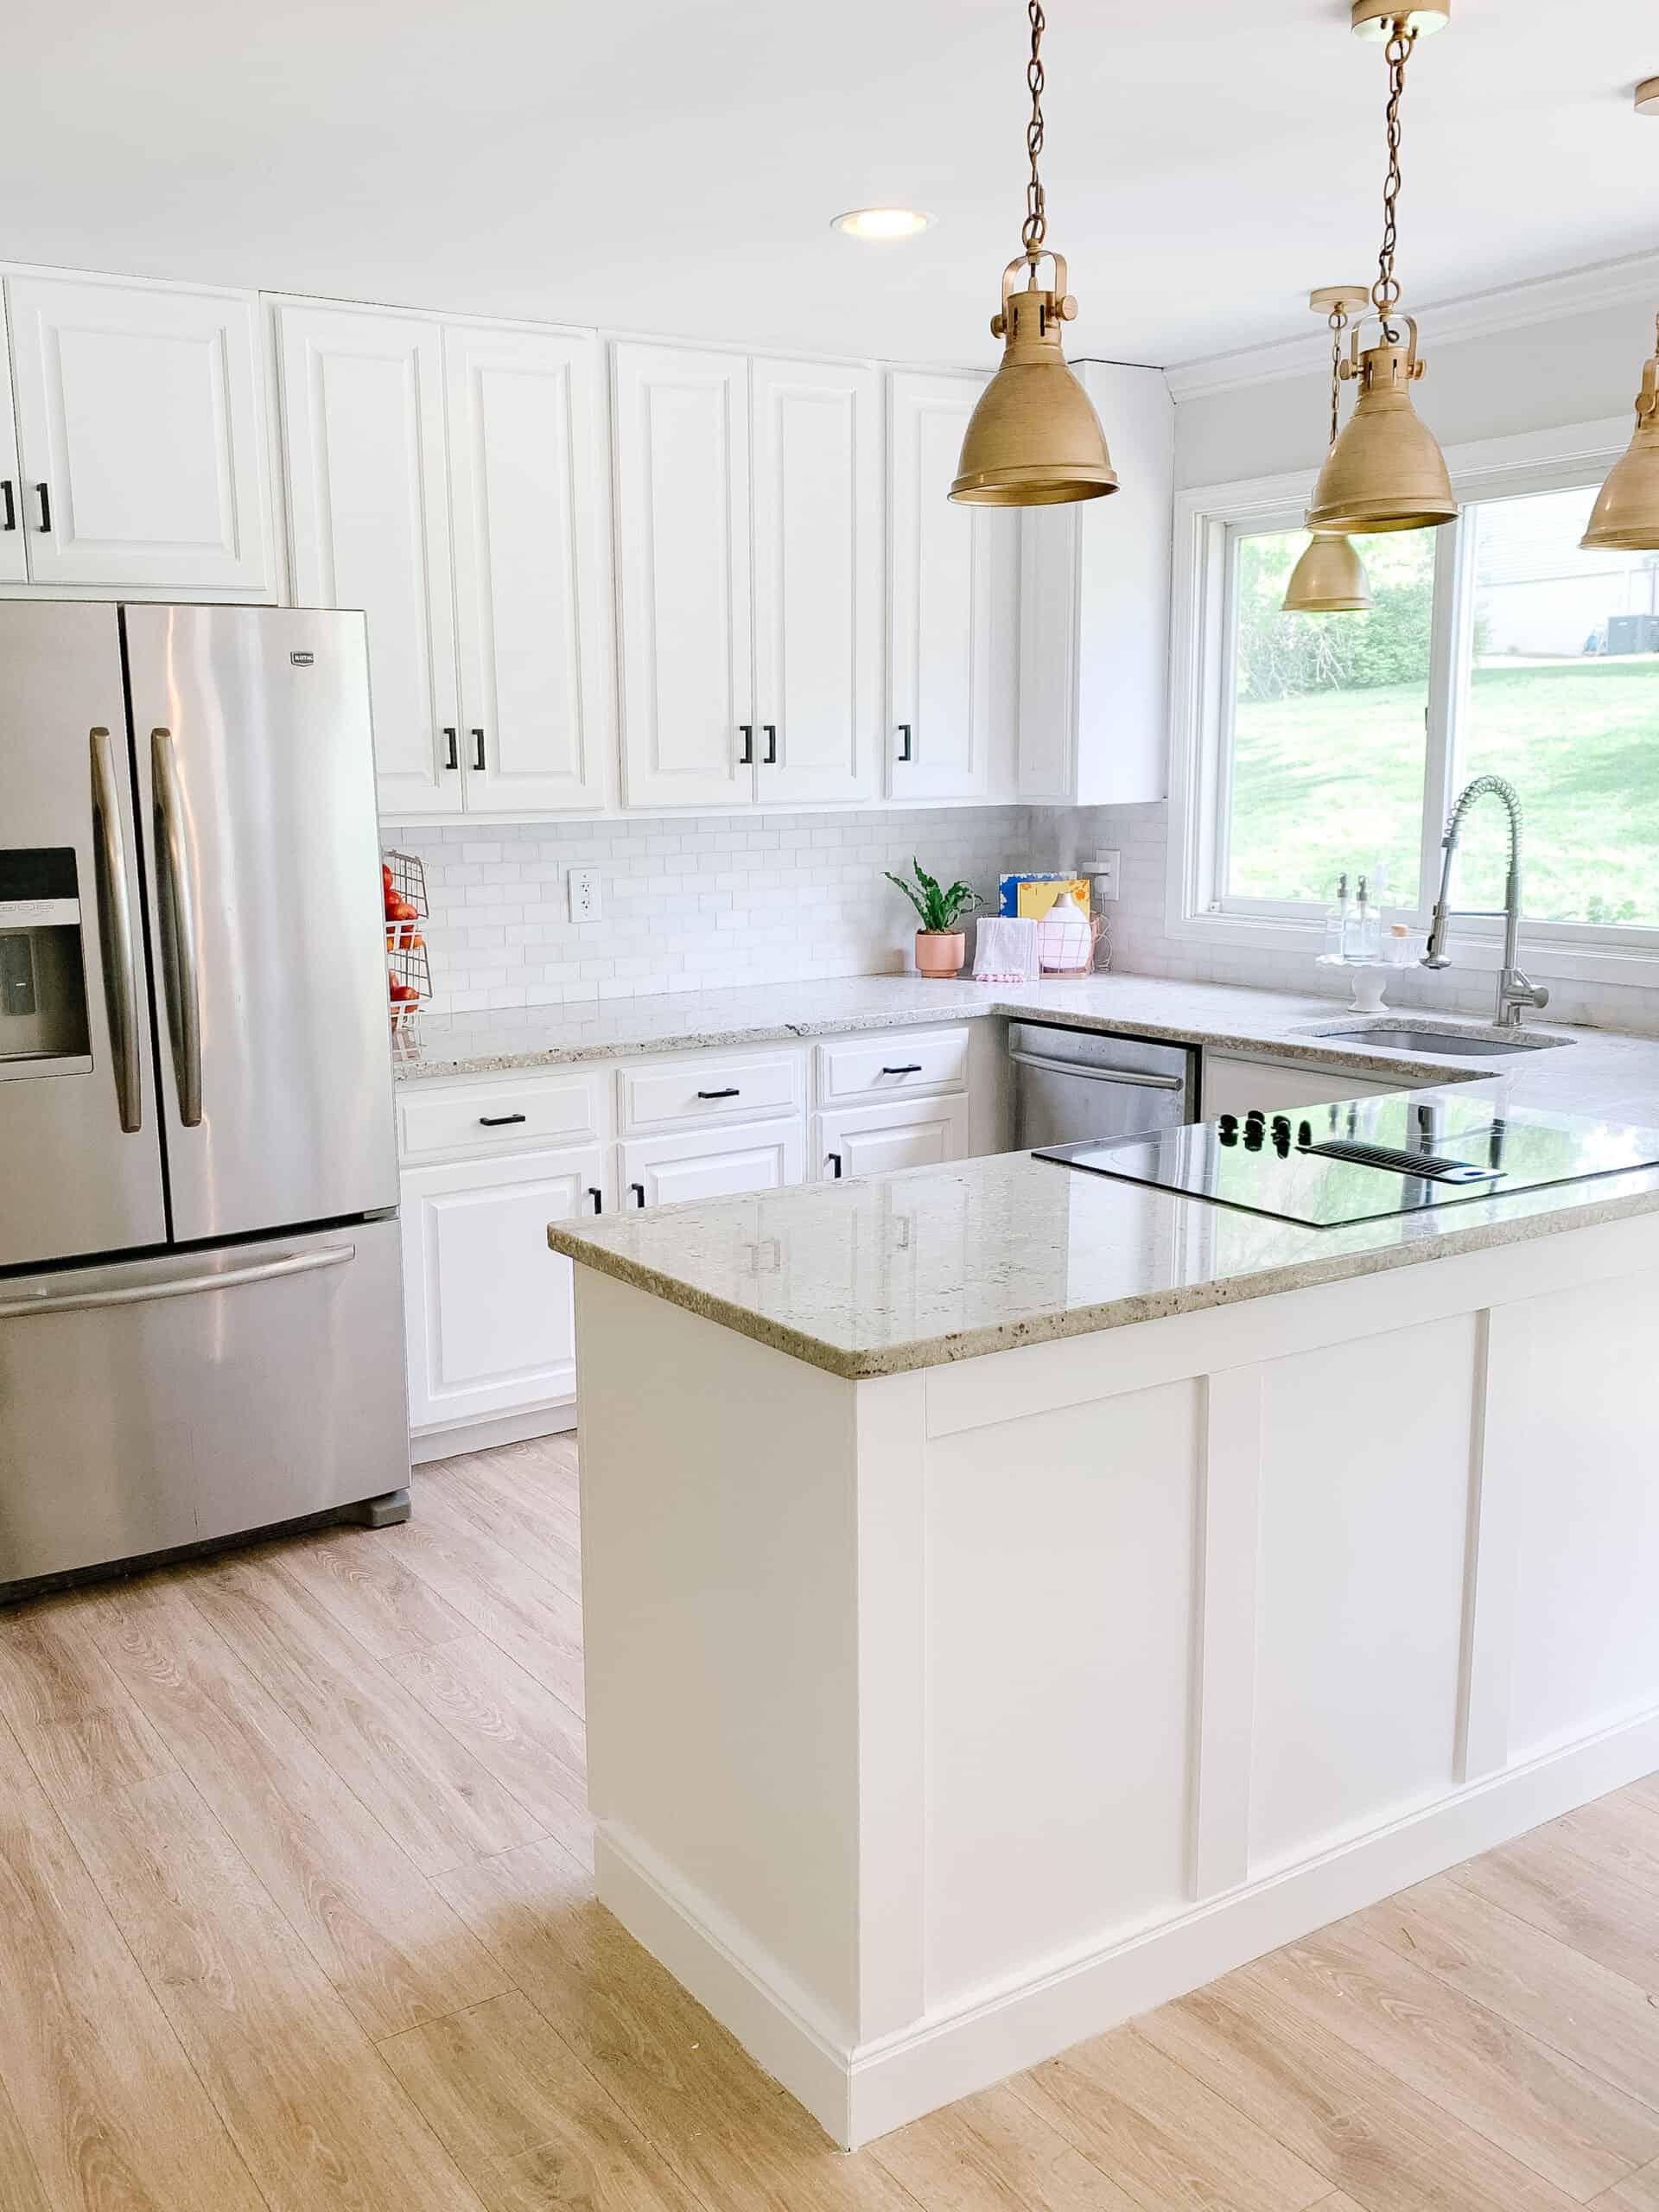 Painting Kitchen Cabinets White, What Is A Good White To Paint Kitchen Cabinets